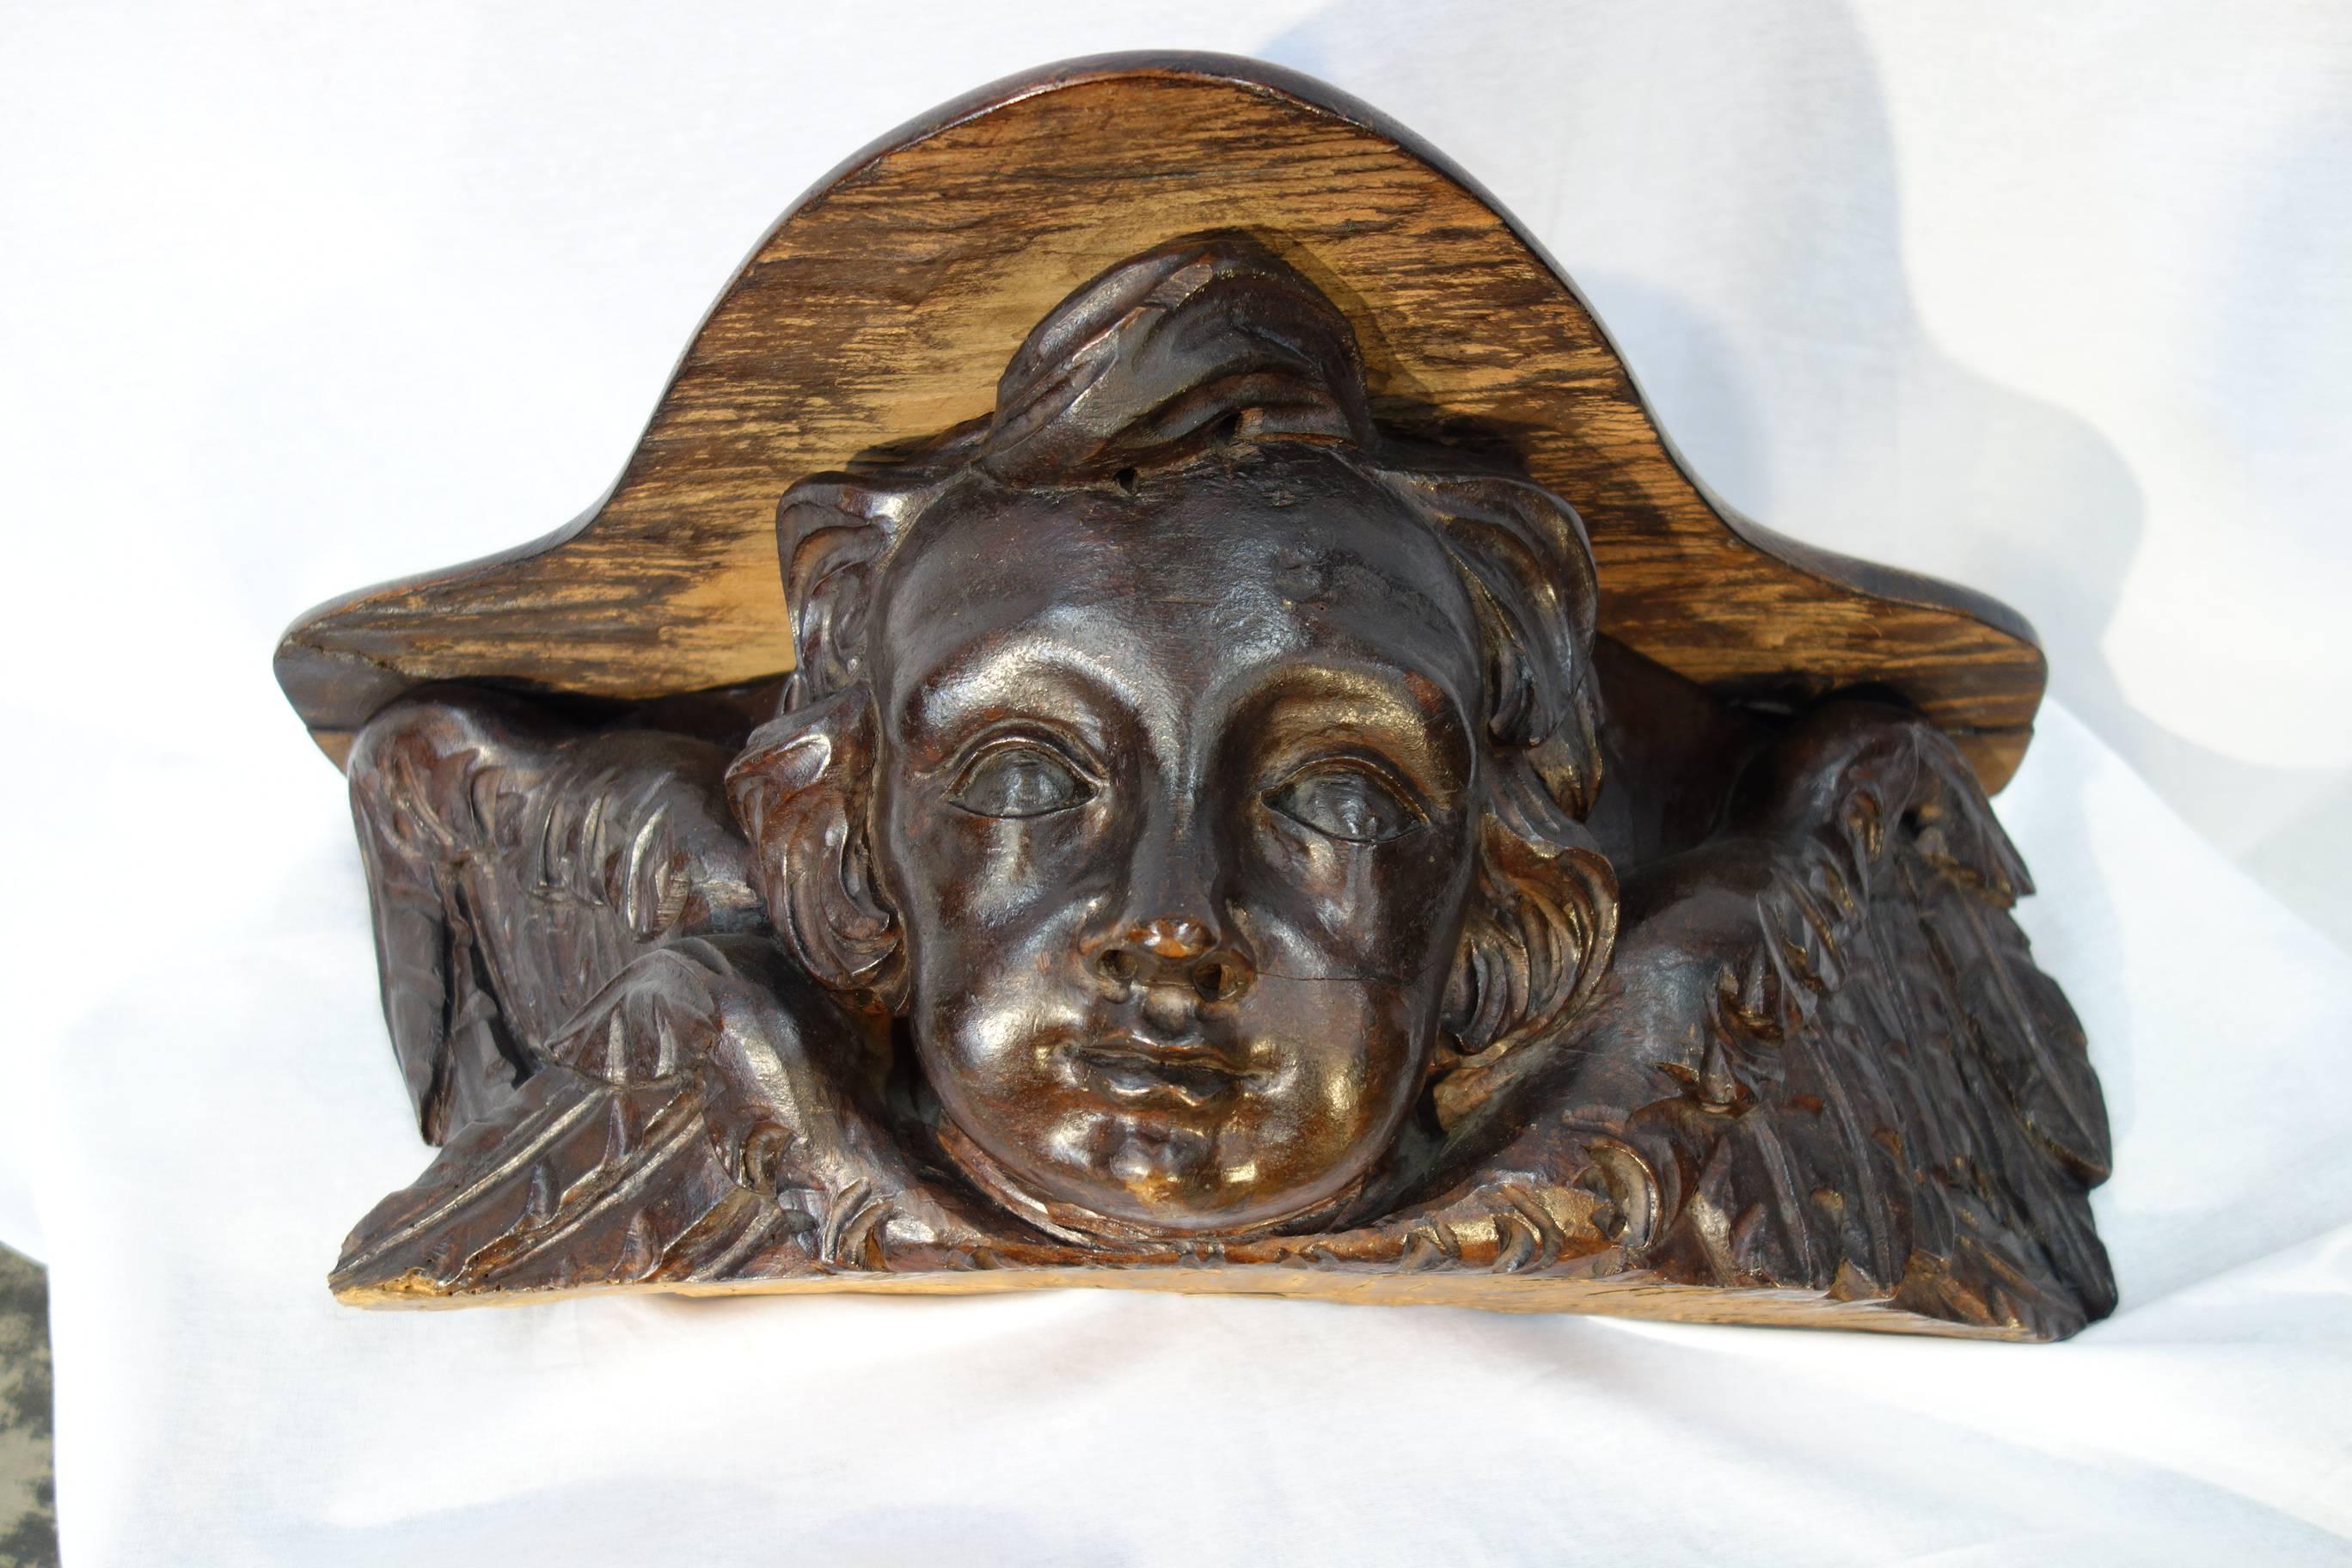 17th Century Tuscan Angel Shelf Carved from Single Block of Walnut Circa 1680.
Wonderful hand-carved walnut shelf in the shape of an angel; the top hinged lid opens up; base is fully hand-carved from a single block of walnut.